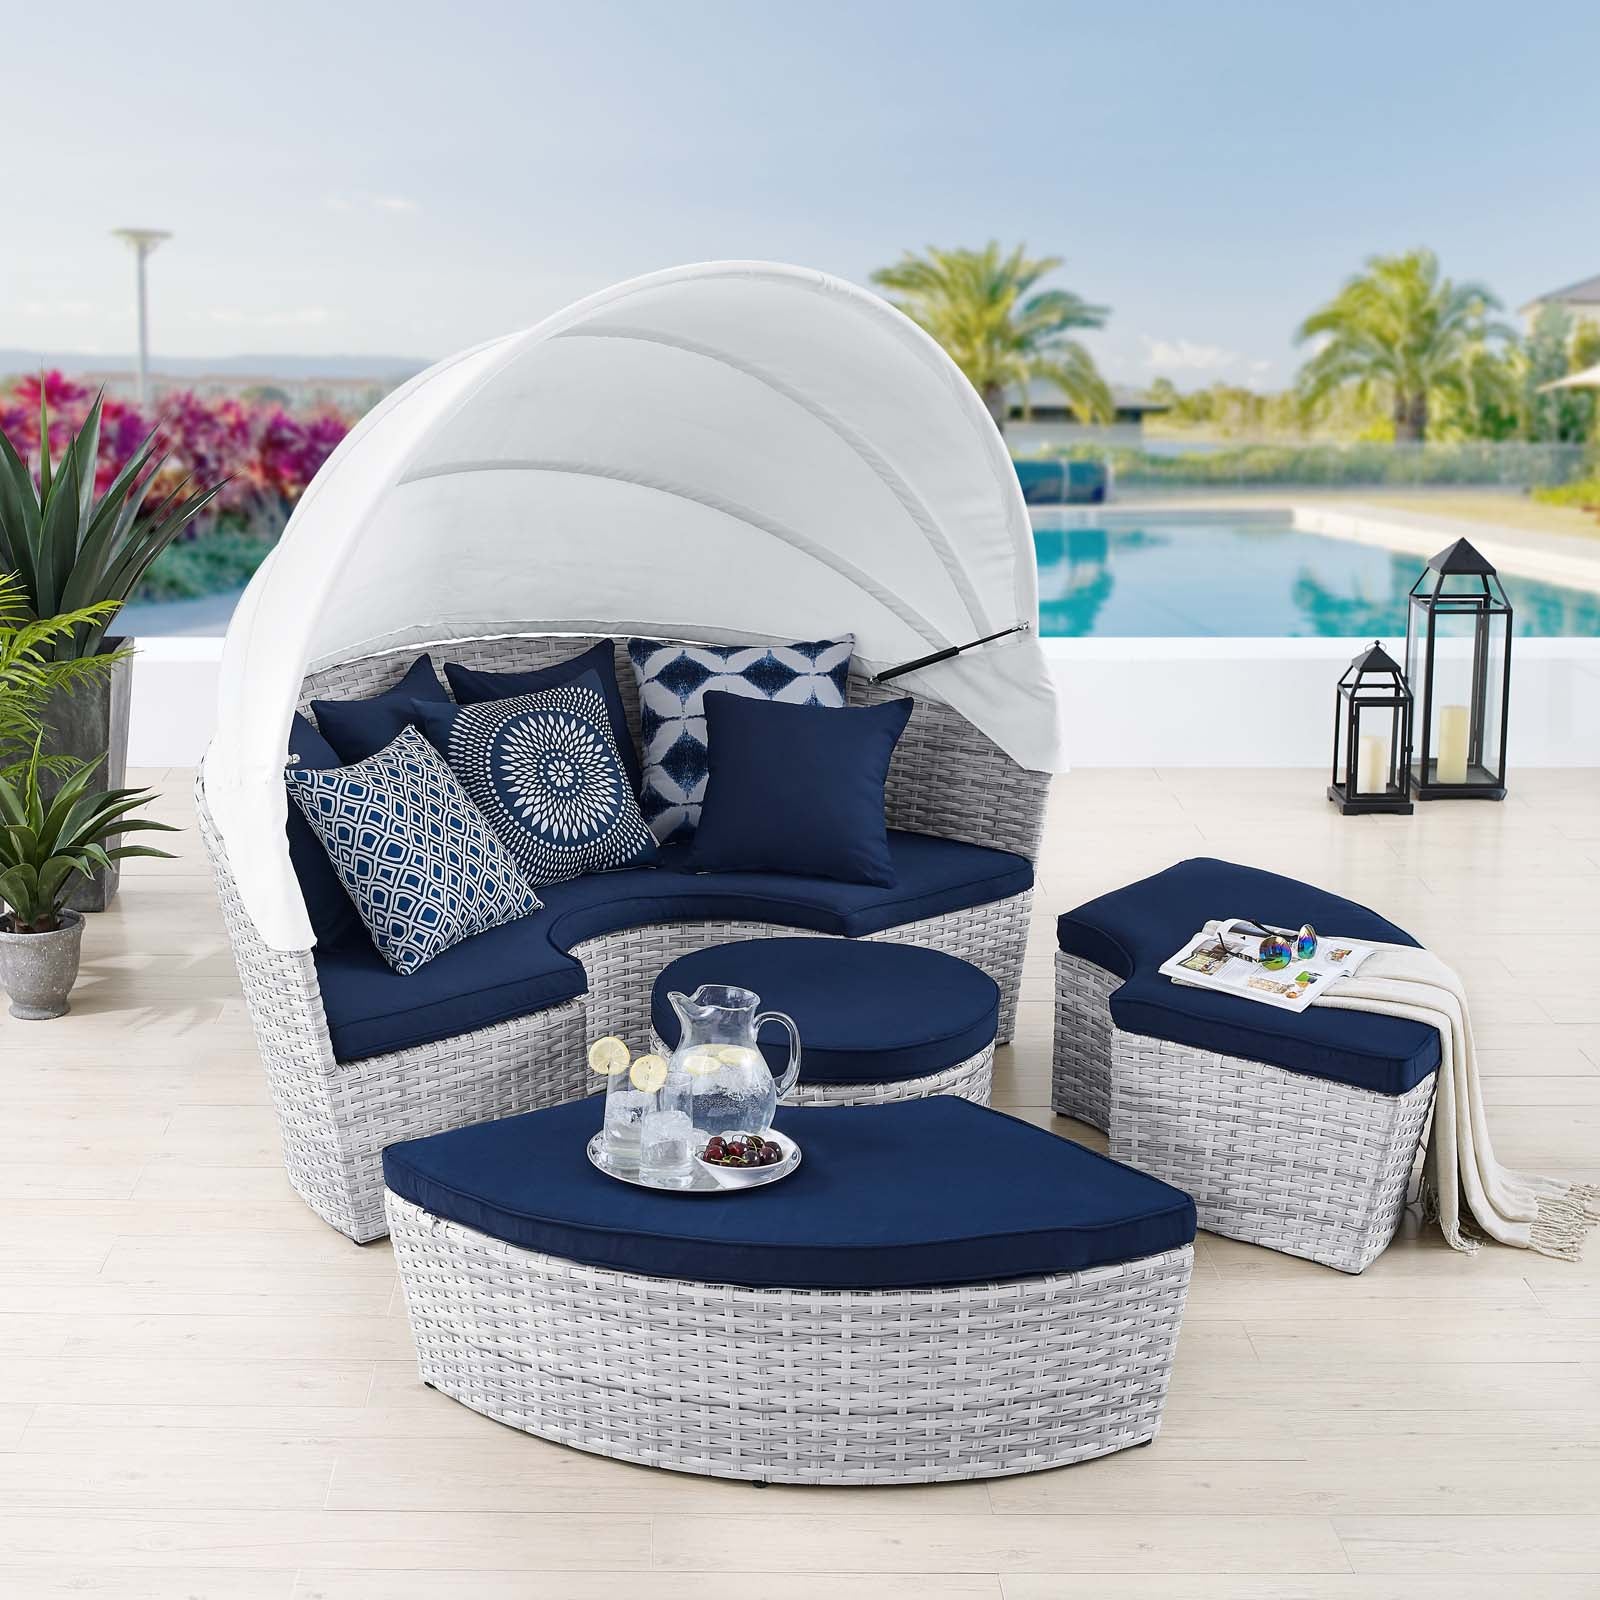 Scottsdale Canopy Sunbrella® Outdoor Patio Daybed - East Shore Modern Home Furnishings